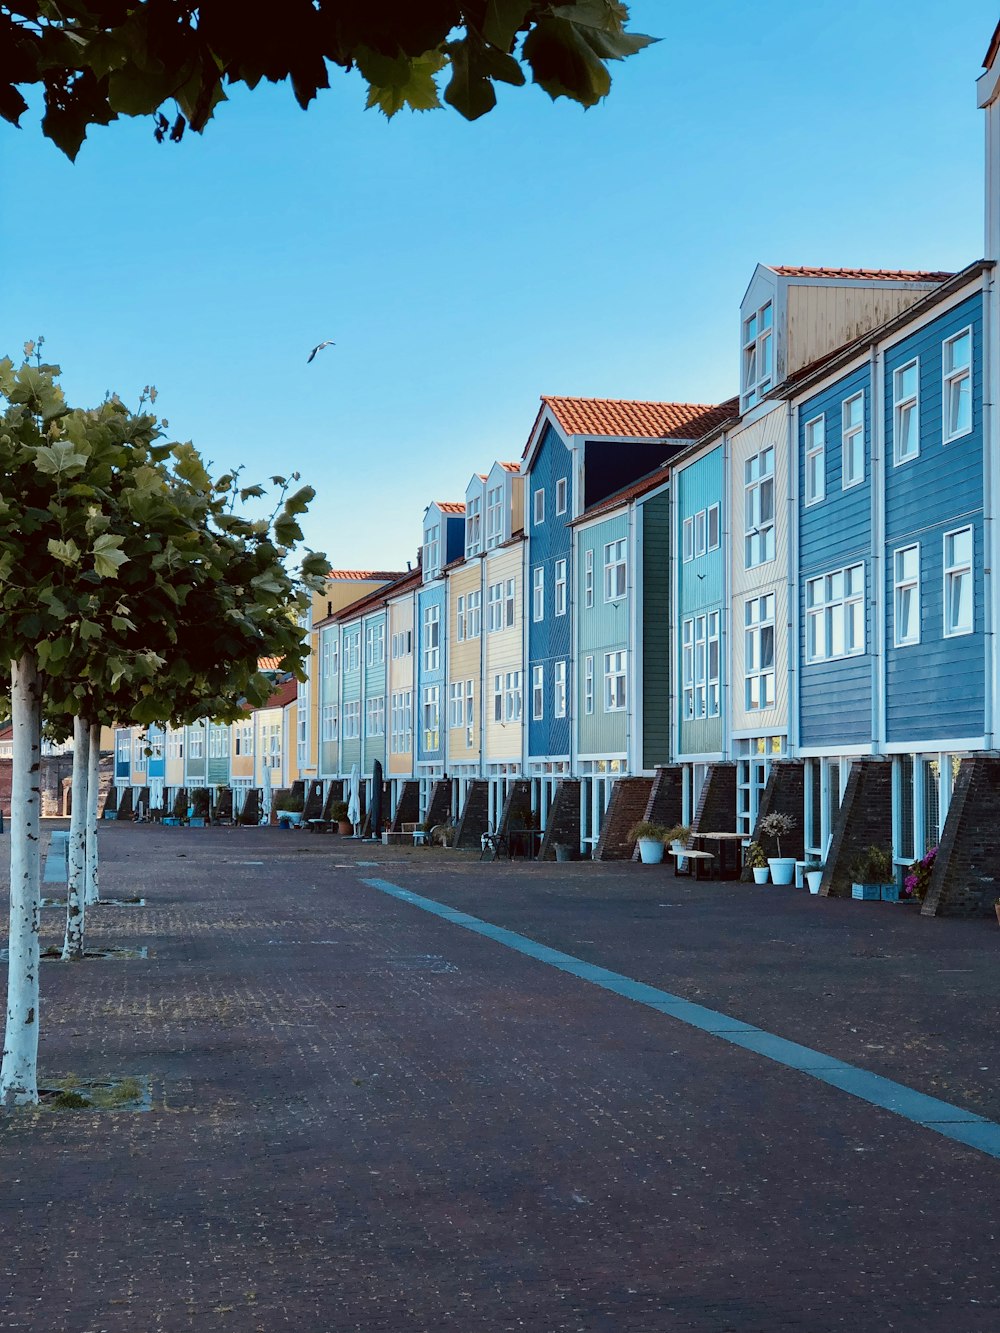 blue wooden houses